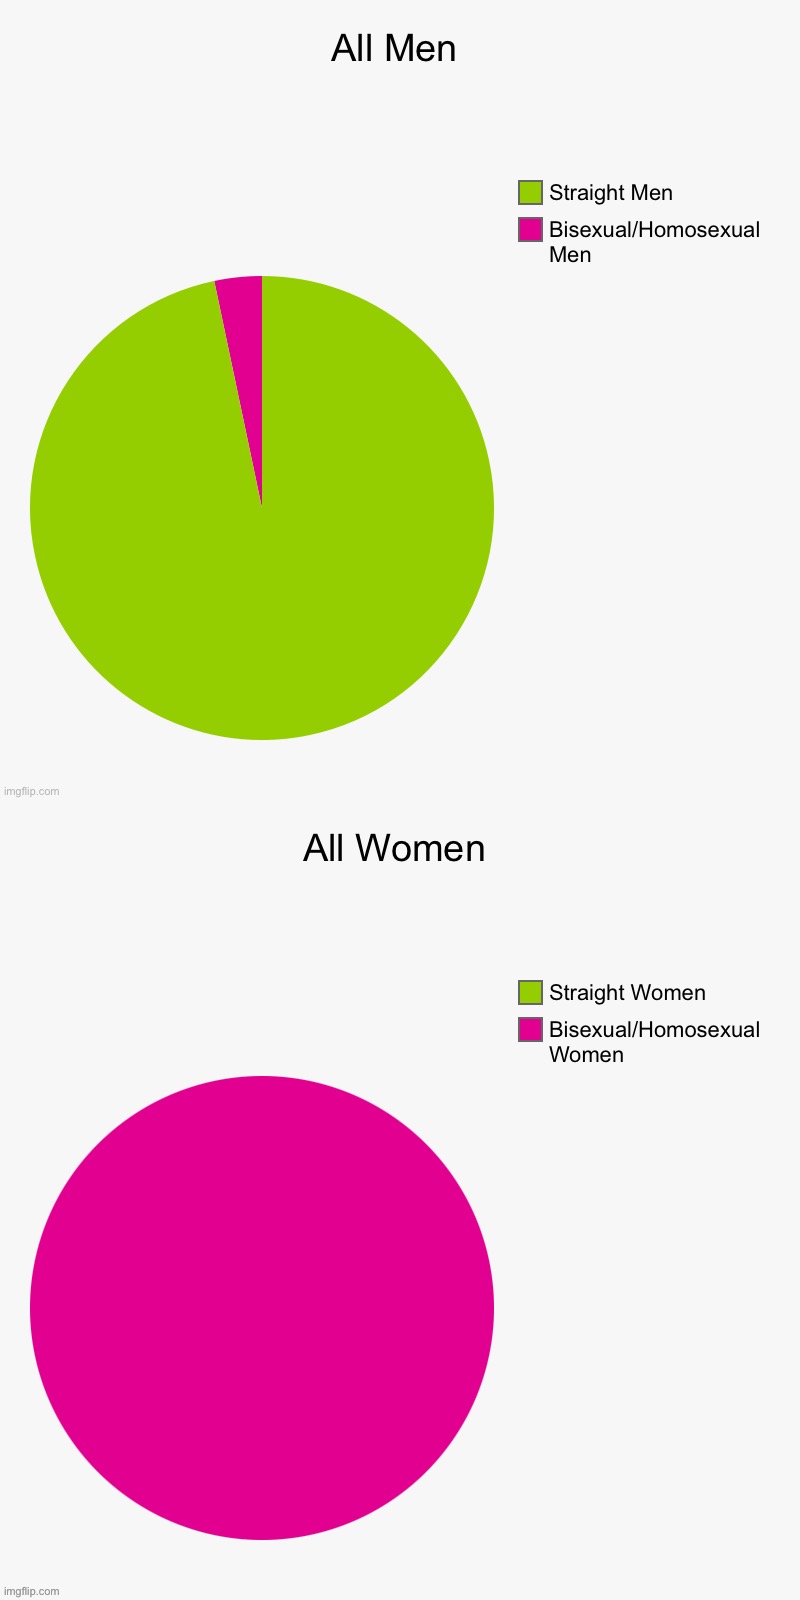 Men and Women | Men; Women | image tagged in charts,difference between men and women,sexuality,women,men,pie charts | made w/ Imgflip meme maker